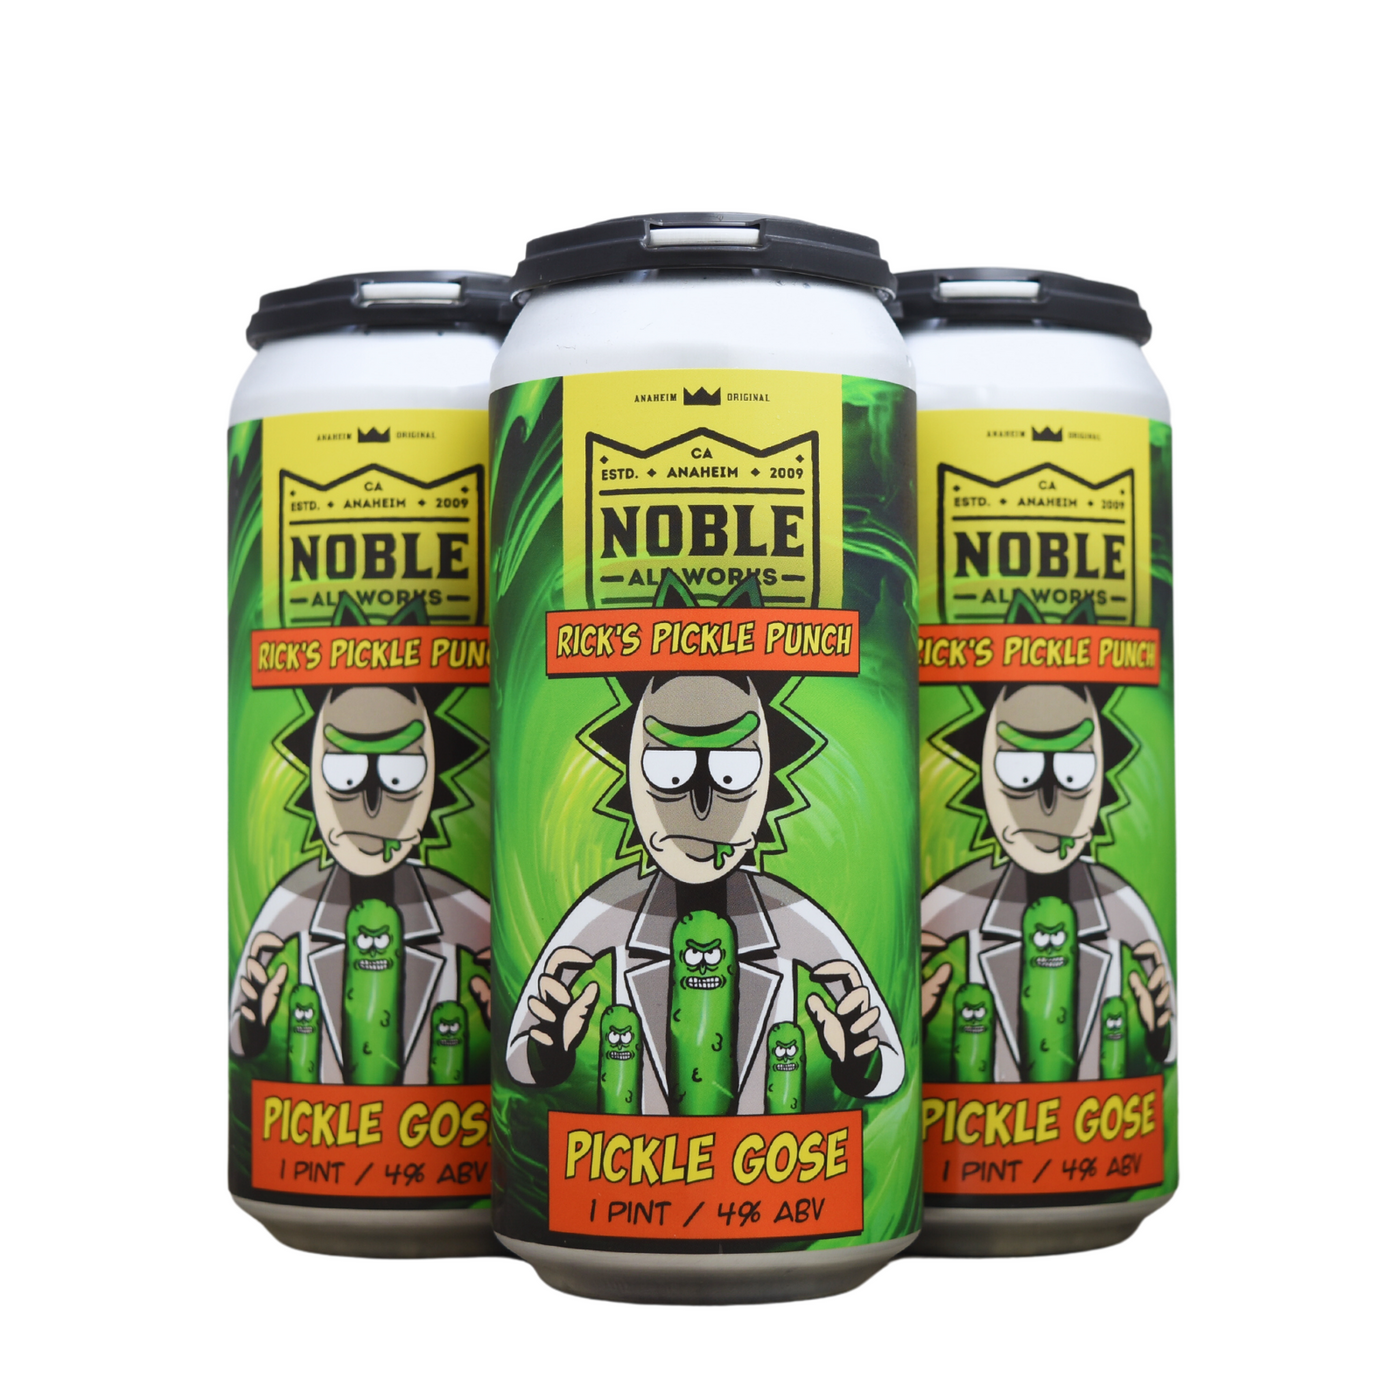 Noble Ale Works Pickle Gose